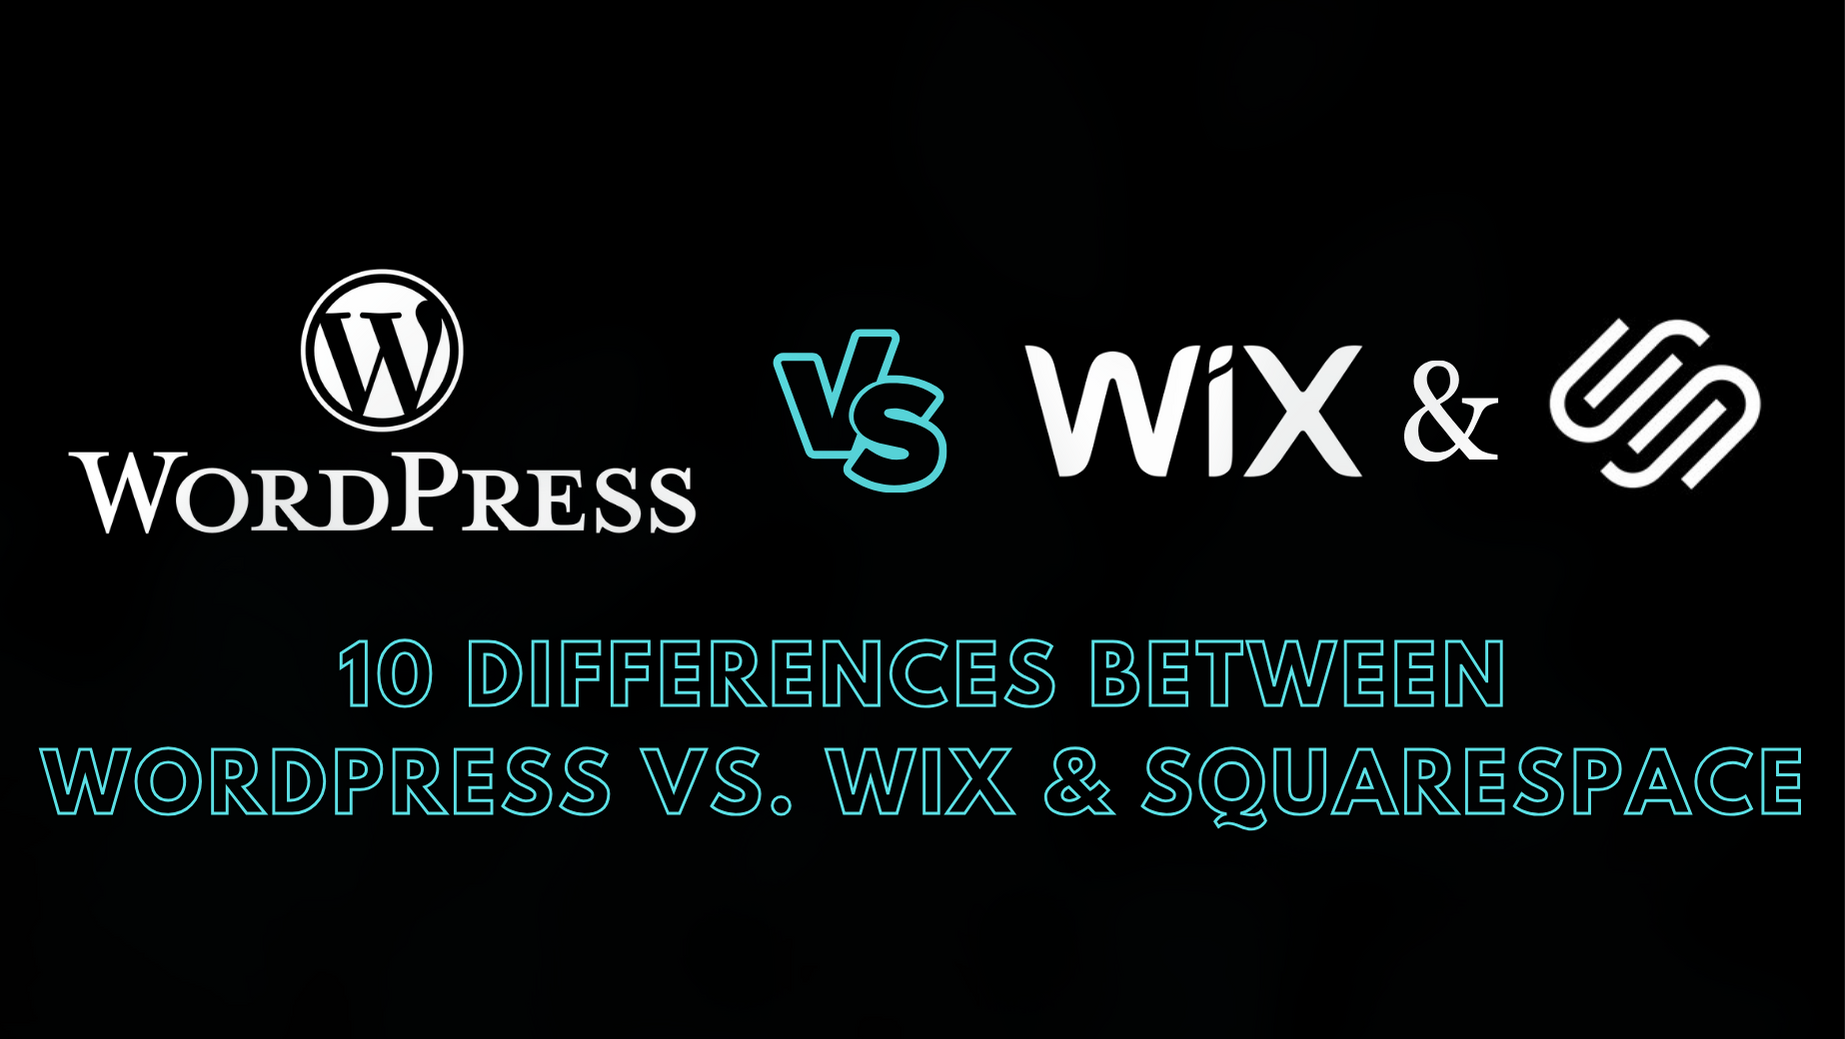 10 Differences between WordPress vs. Wix or Squarespace.